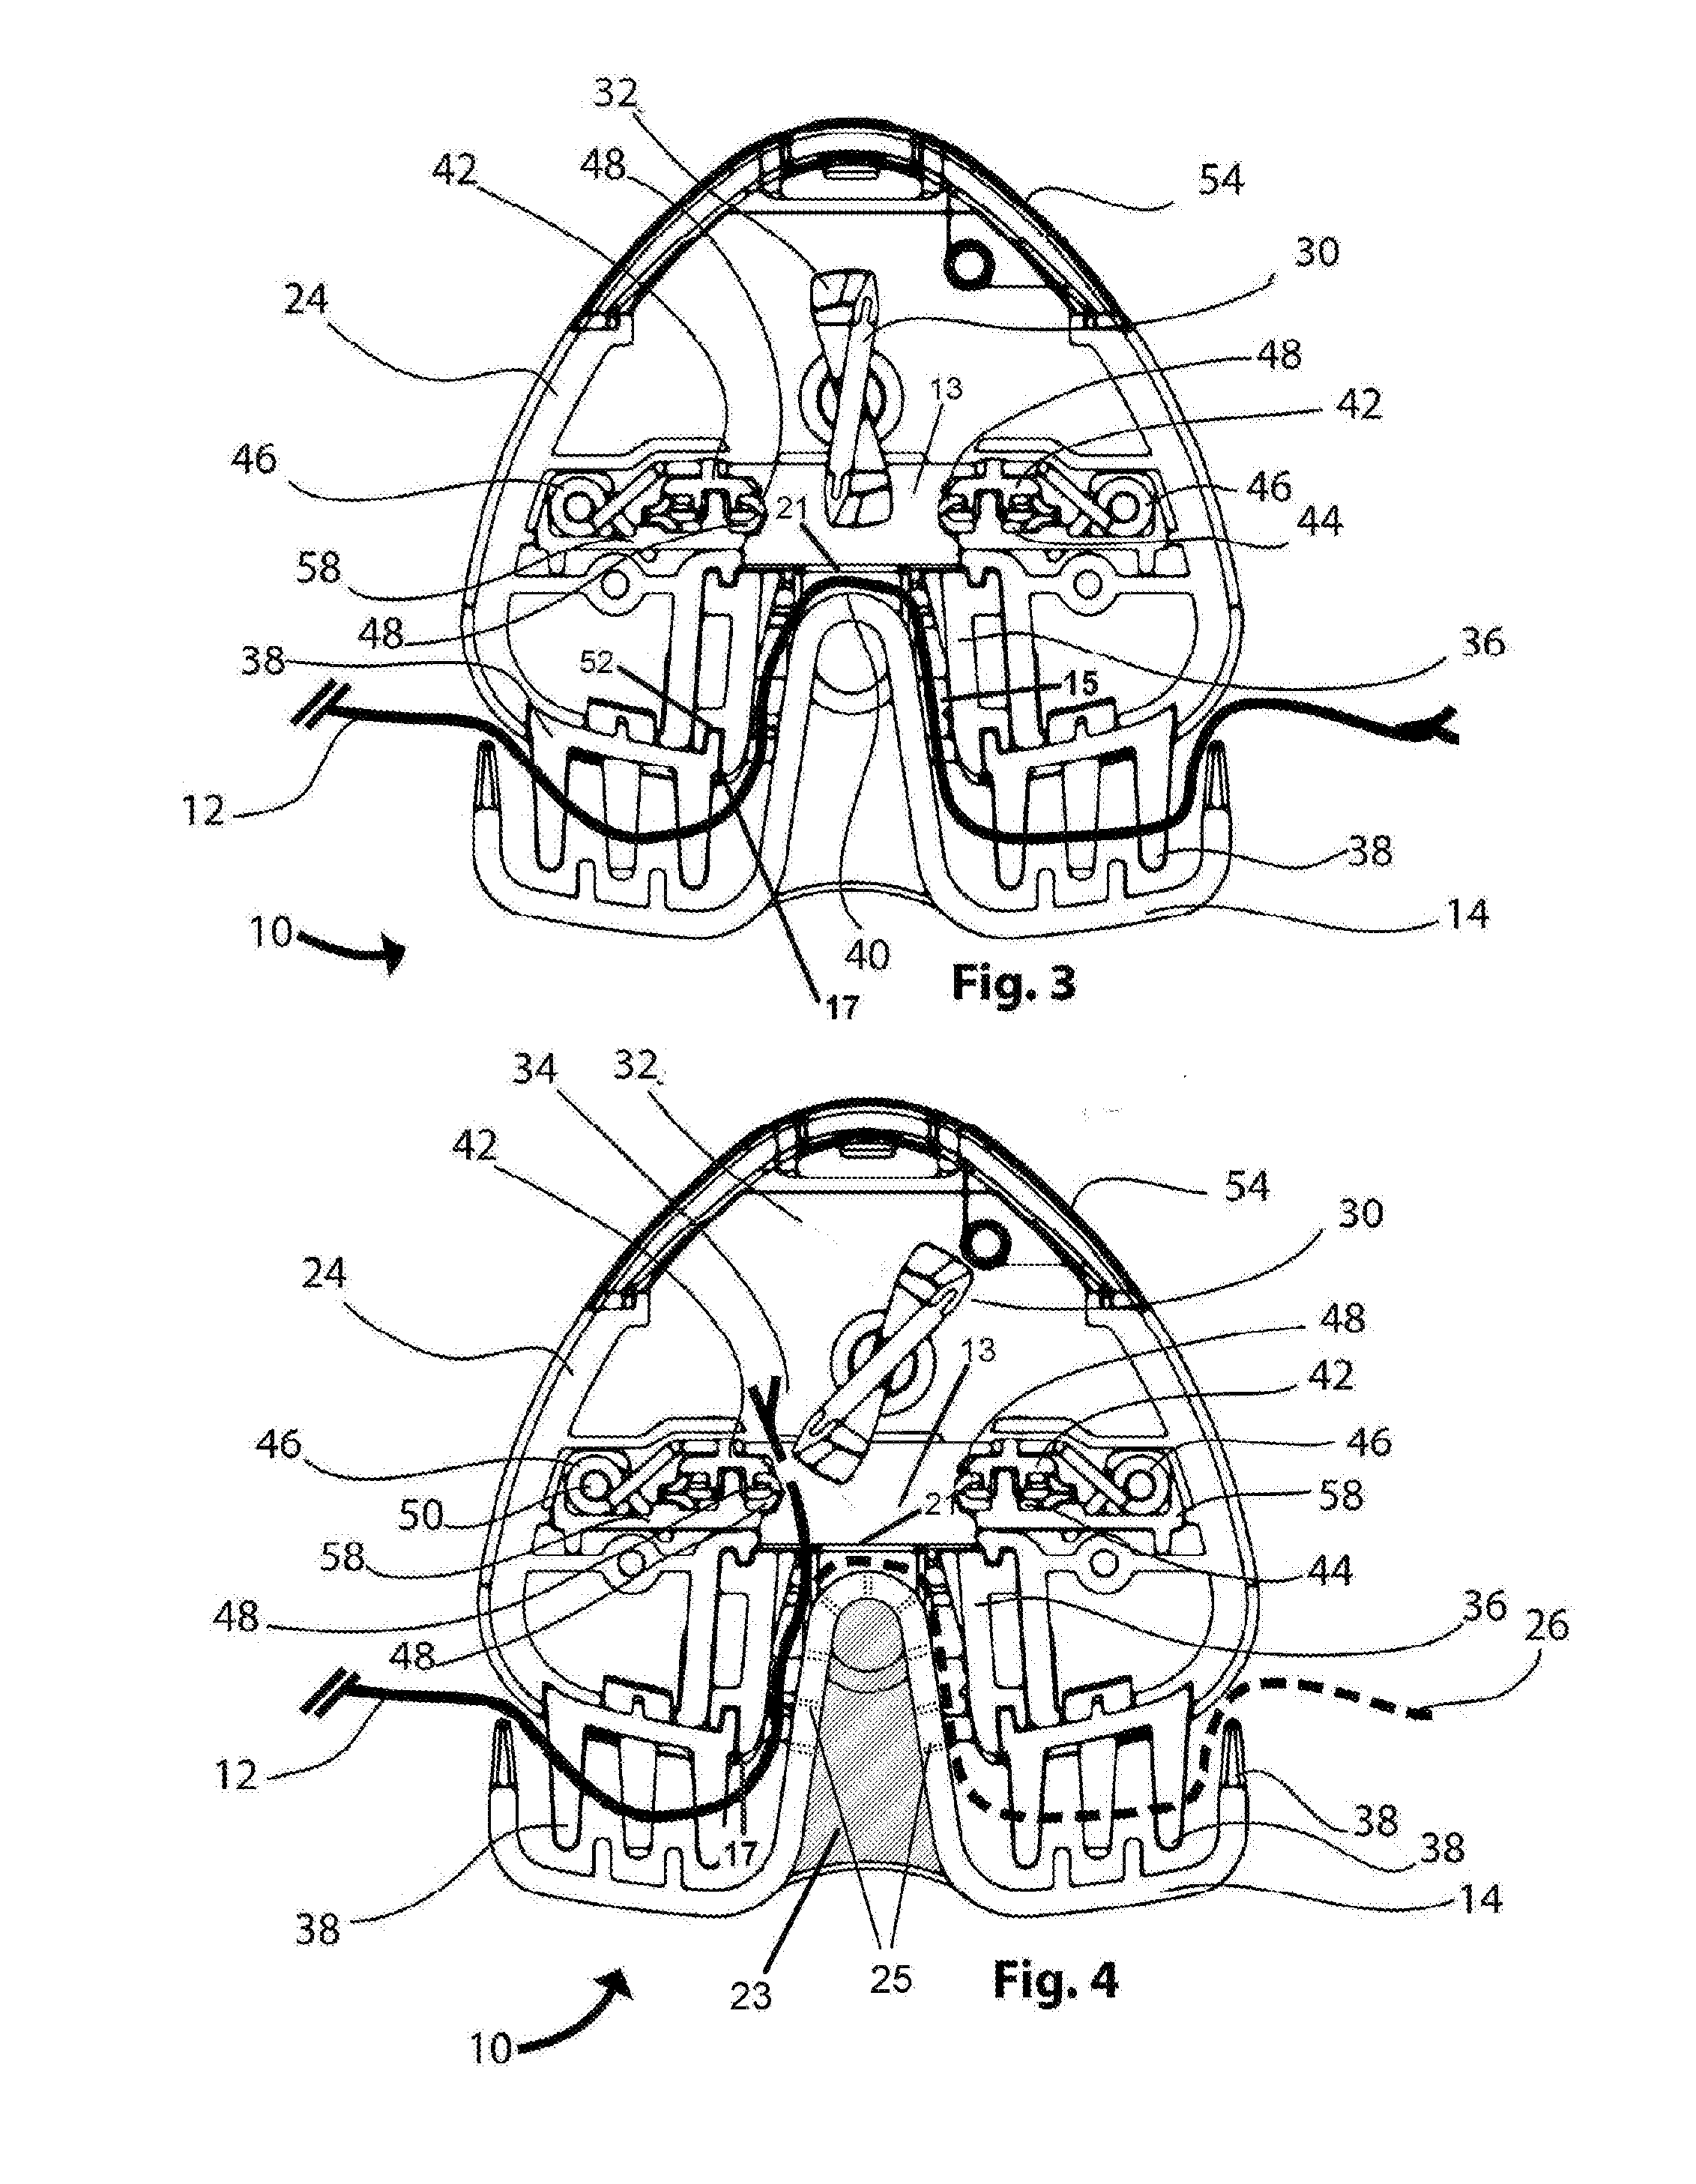 Hair Trimming Device